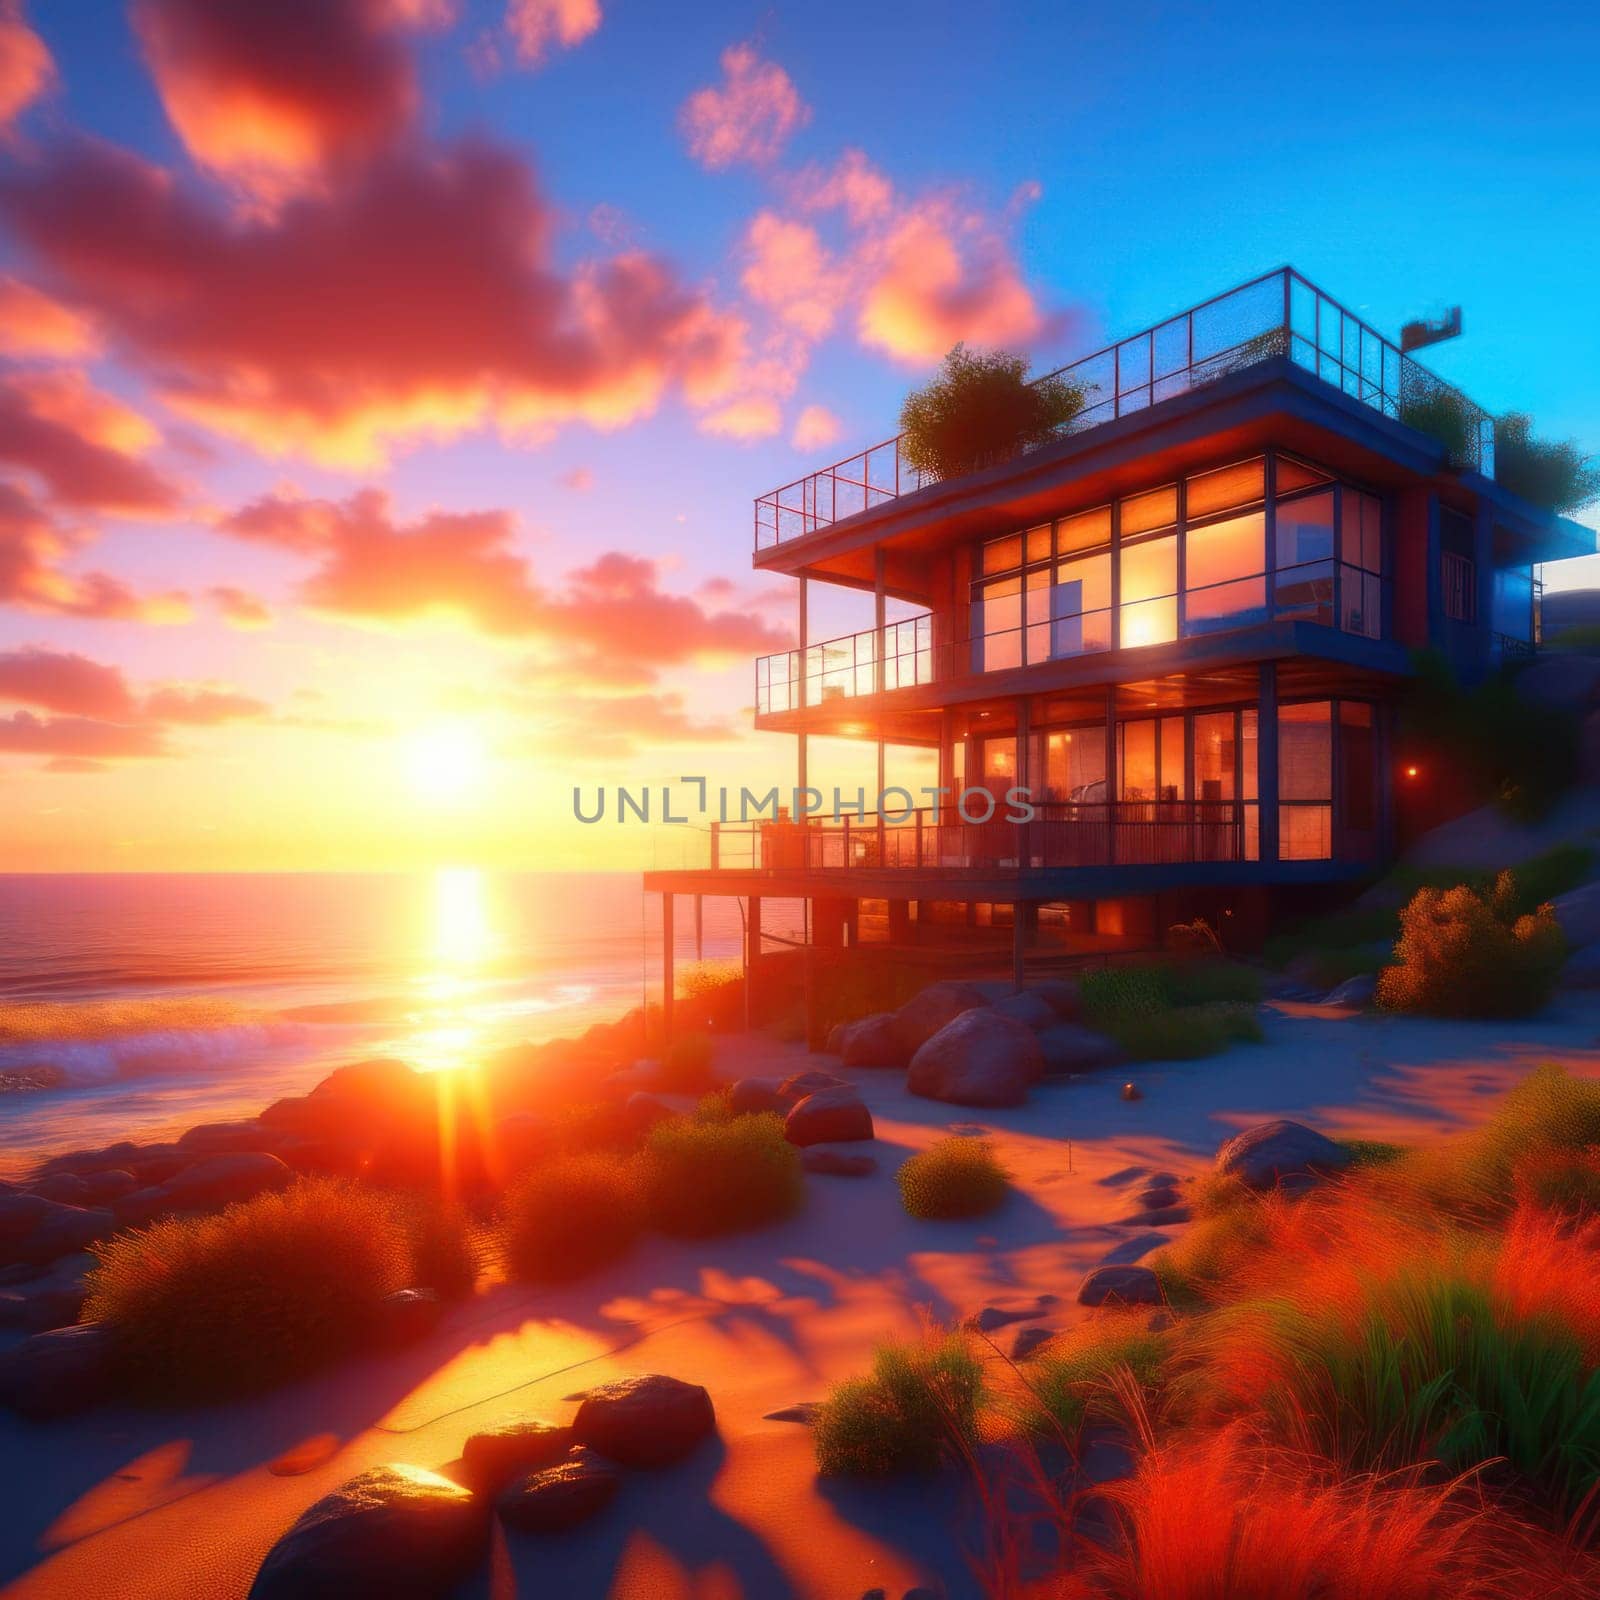 House by the sea. Image created by AI